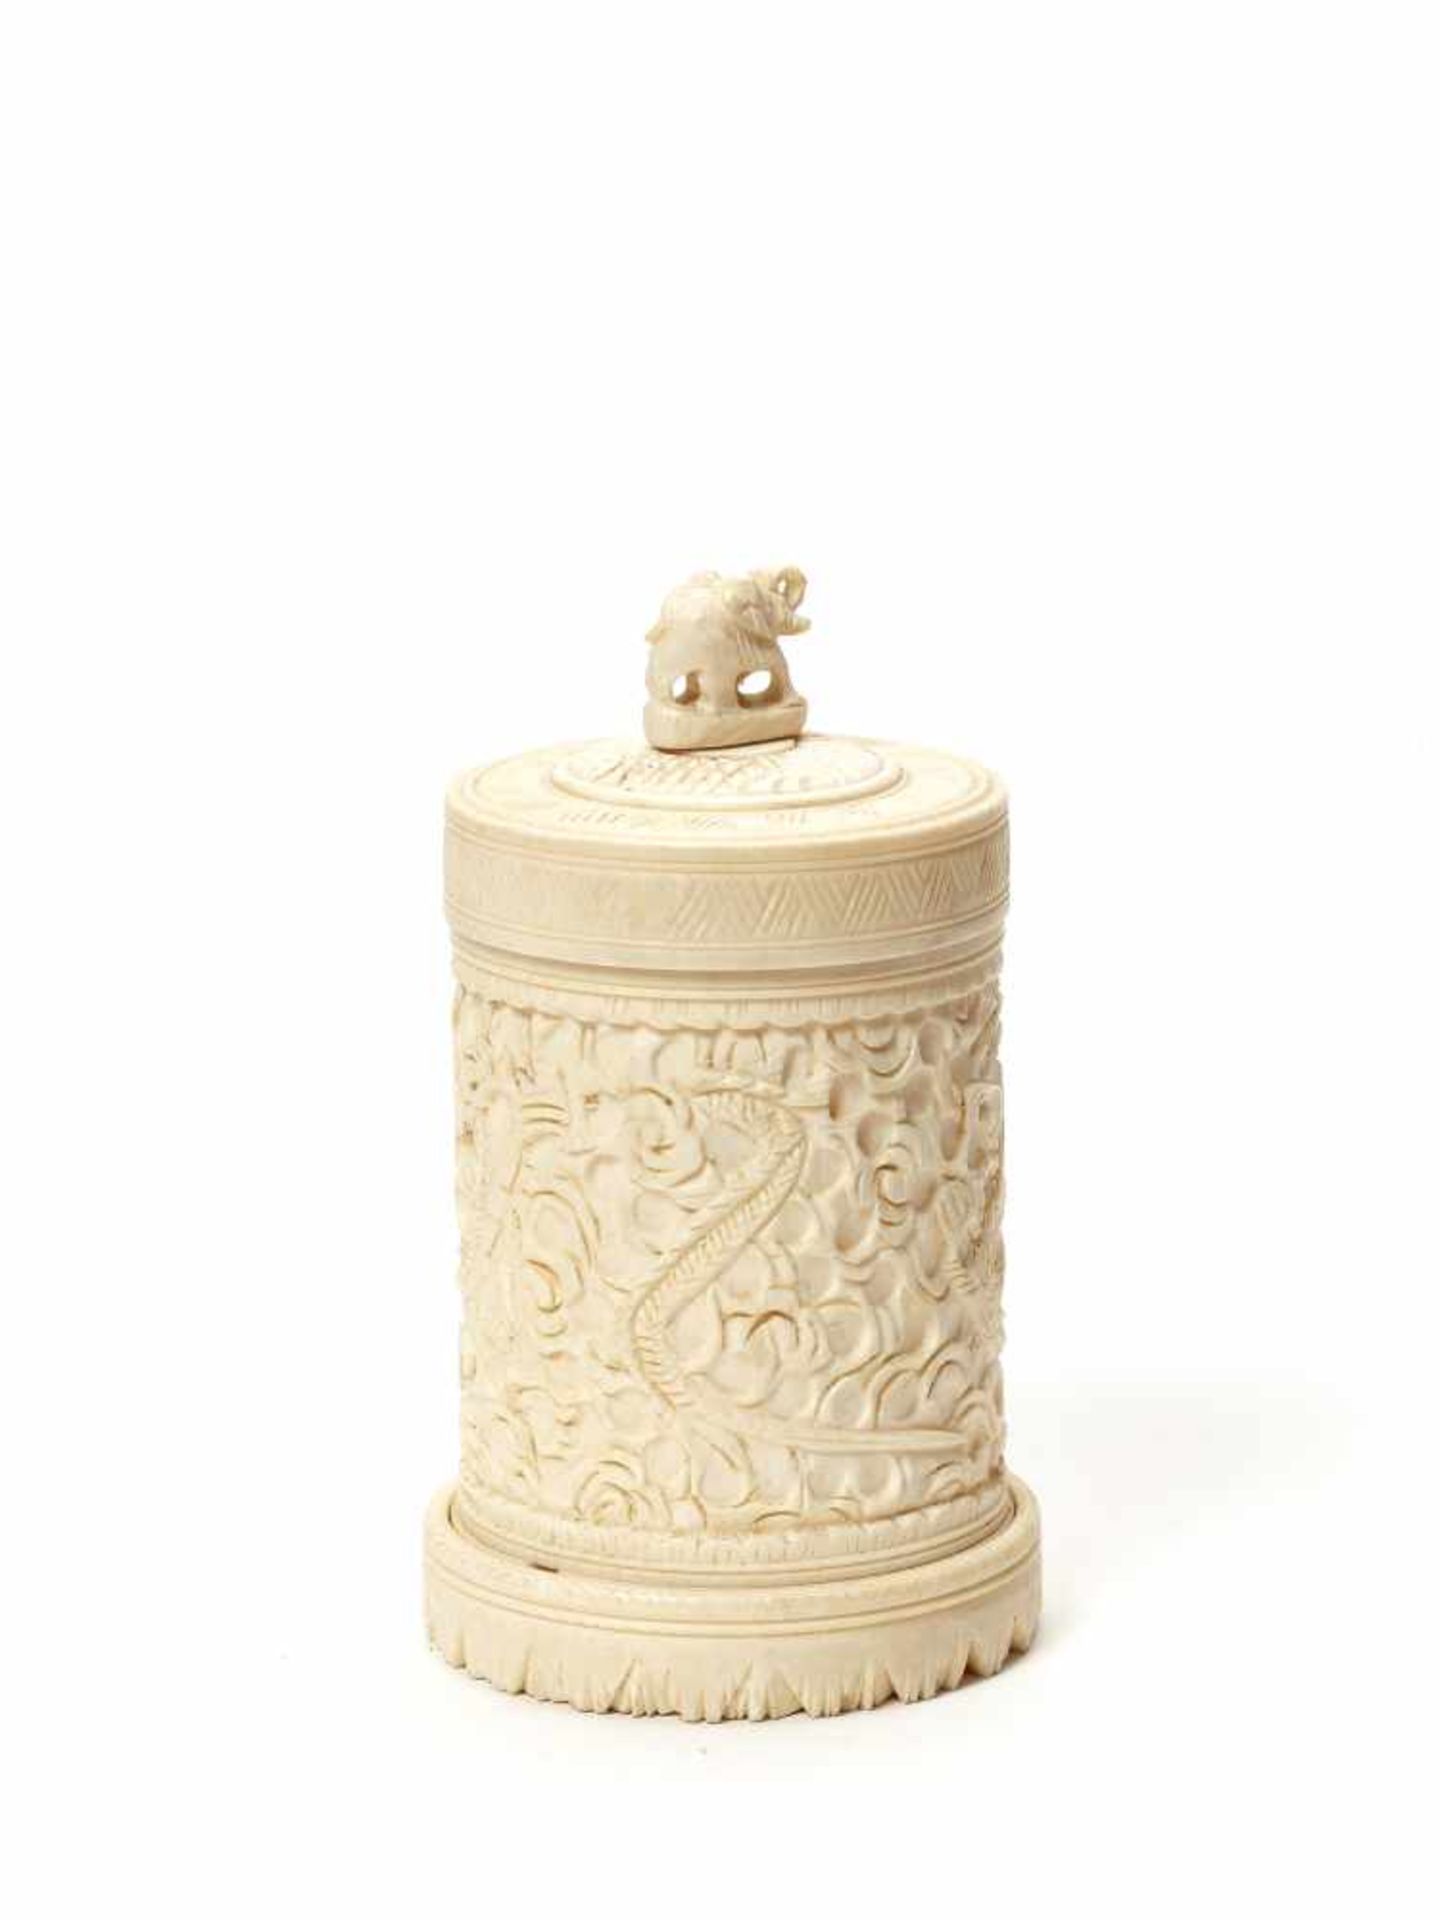 AN INDIAN IVORY BOX AND COVER, C. 1880IvoryIndia, c. 1880This Indian ivory box and cover features - Image 4 of 5